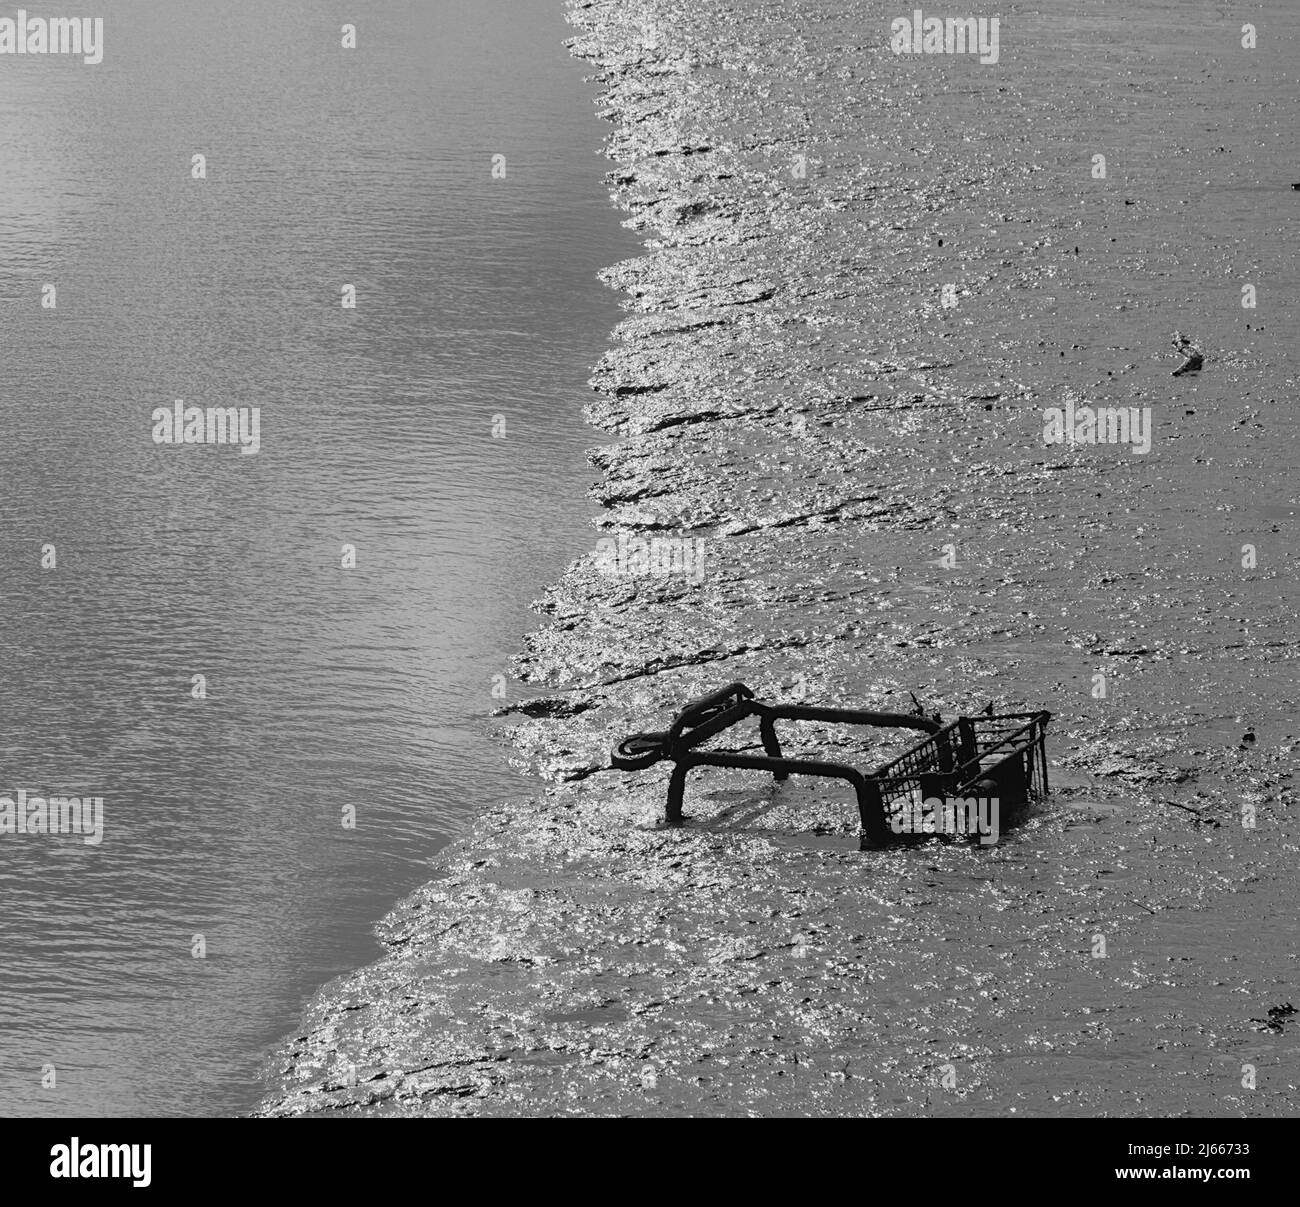 Shopping Trolley Thrown In And Abandoned In The Mud And Water Of Holes Bay Estuary, Poole UK Stock Photo